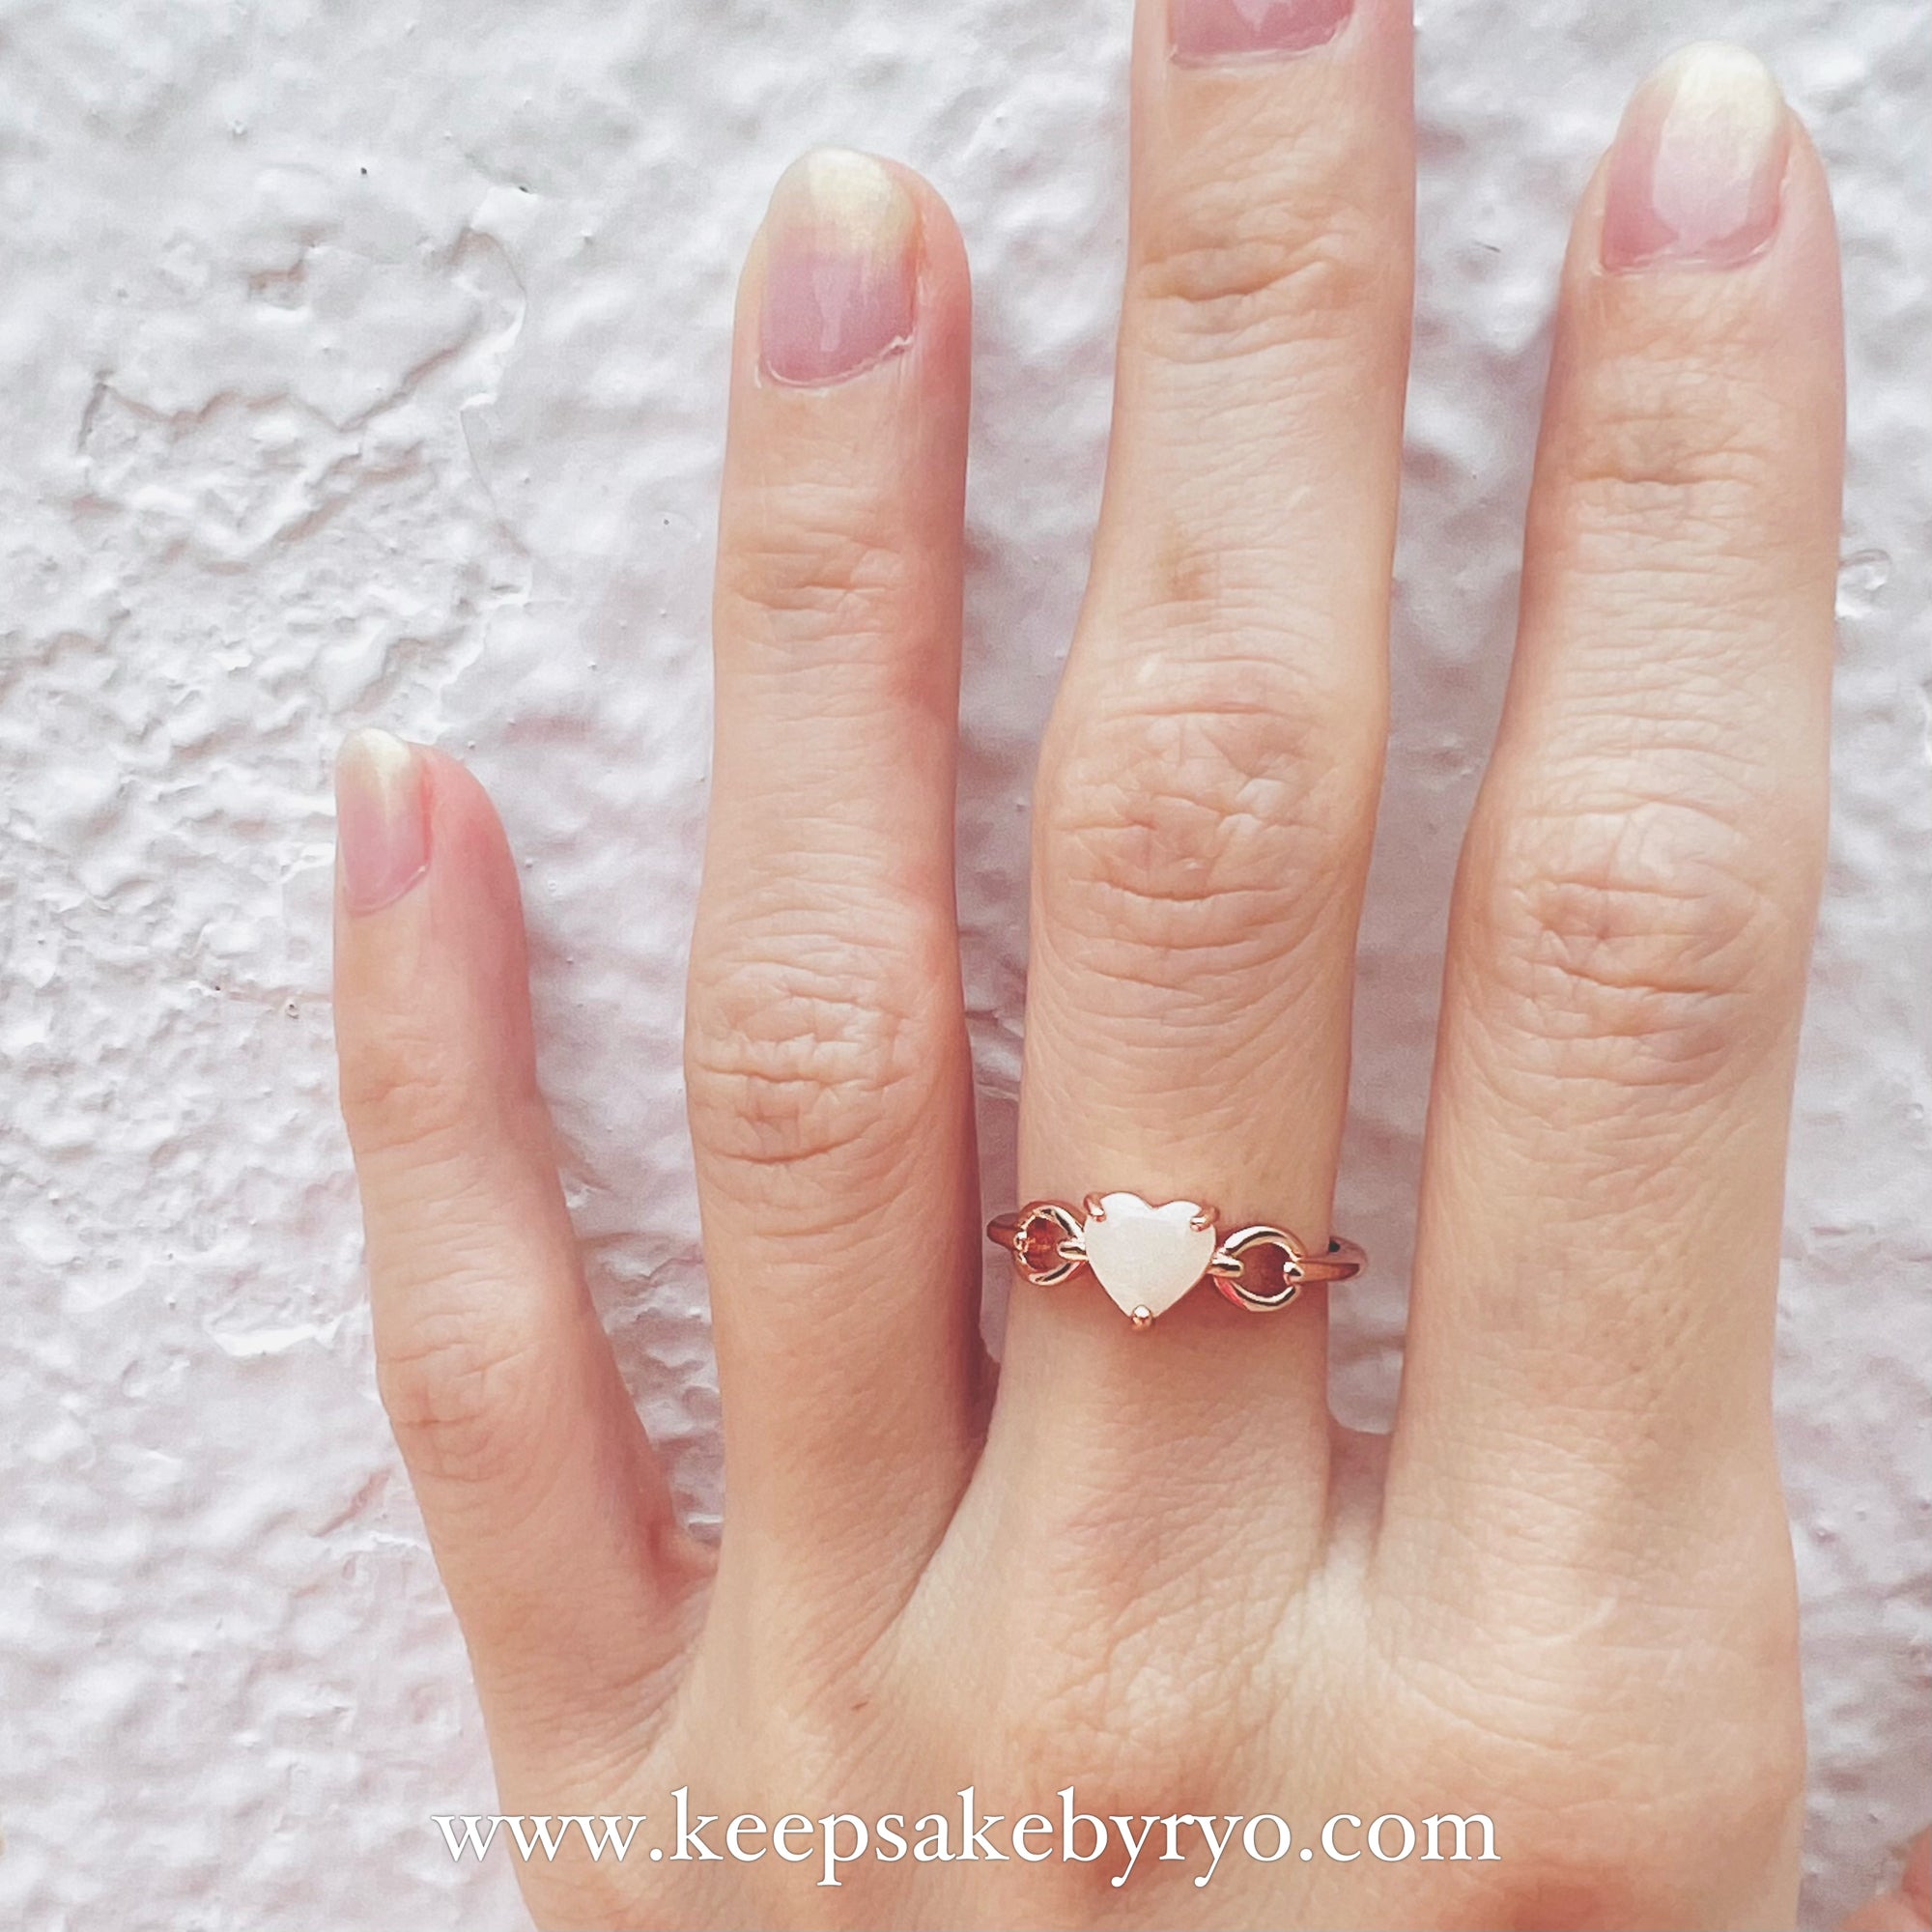 SOLITAIRE: HOPE HEARTLINKS RING WITH HEART SHAPED INCLUSION STONE